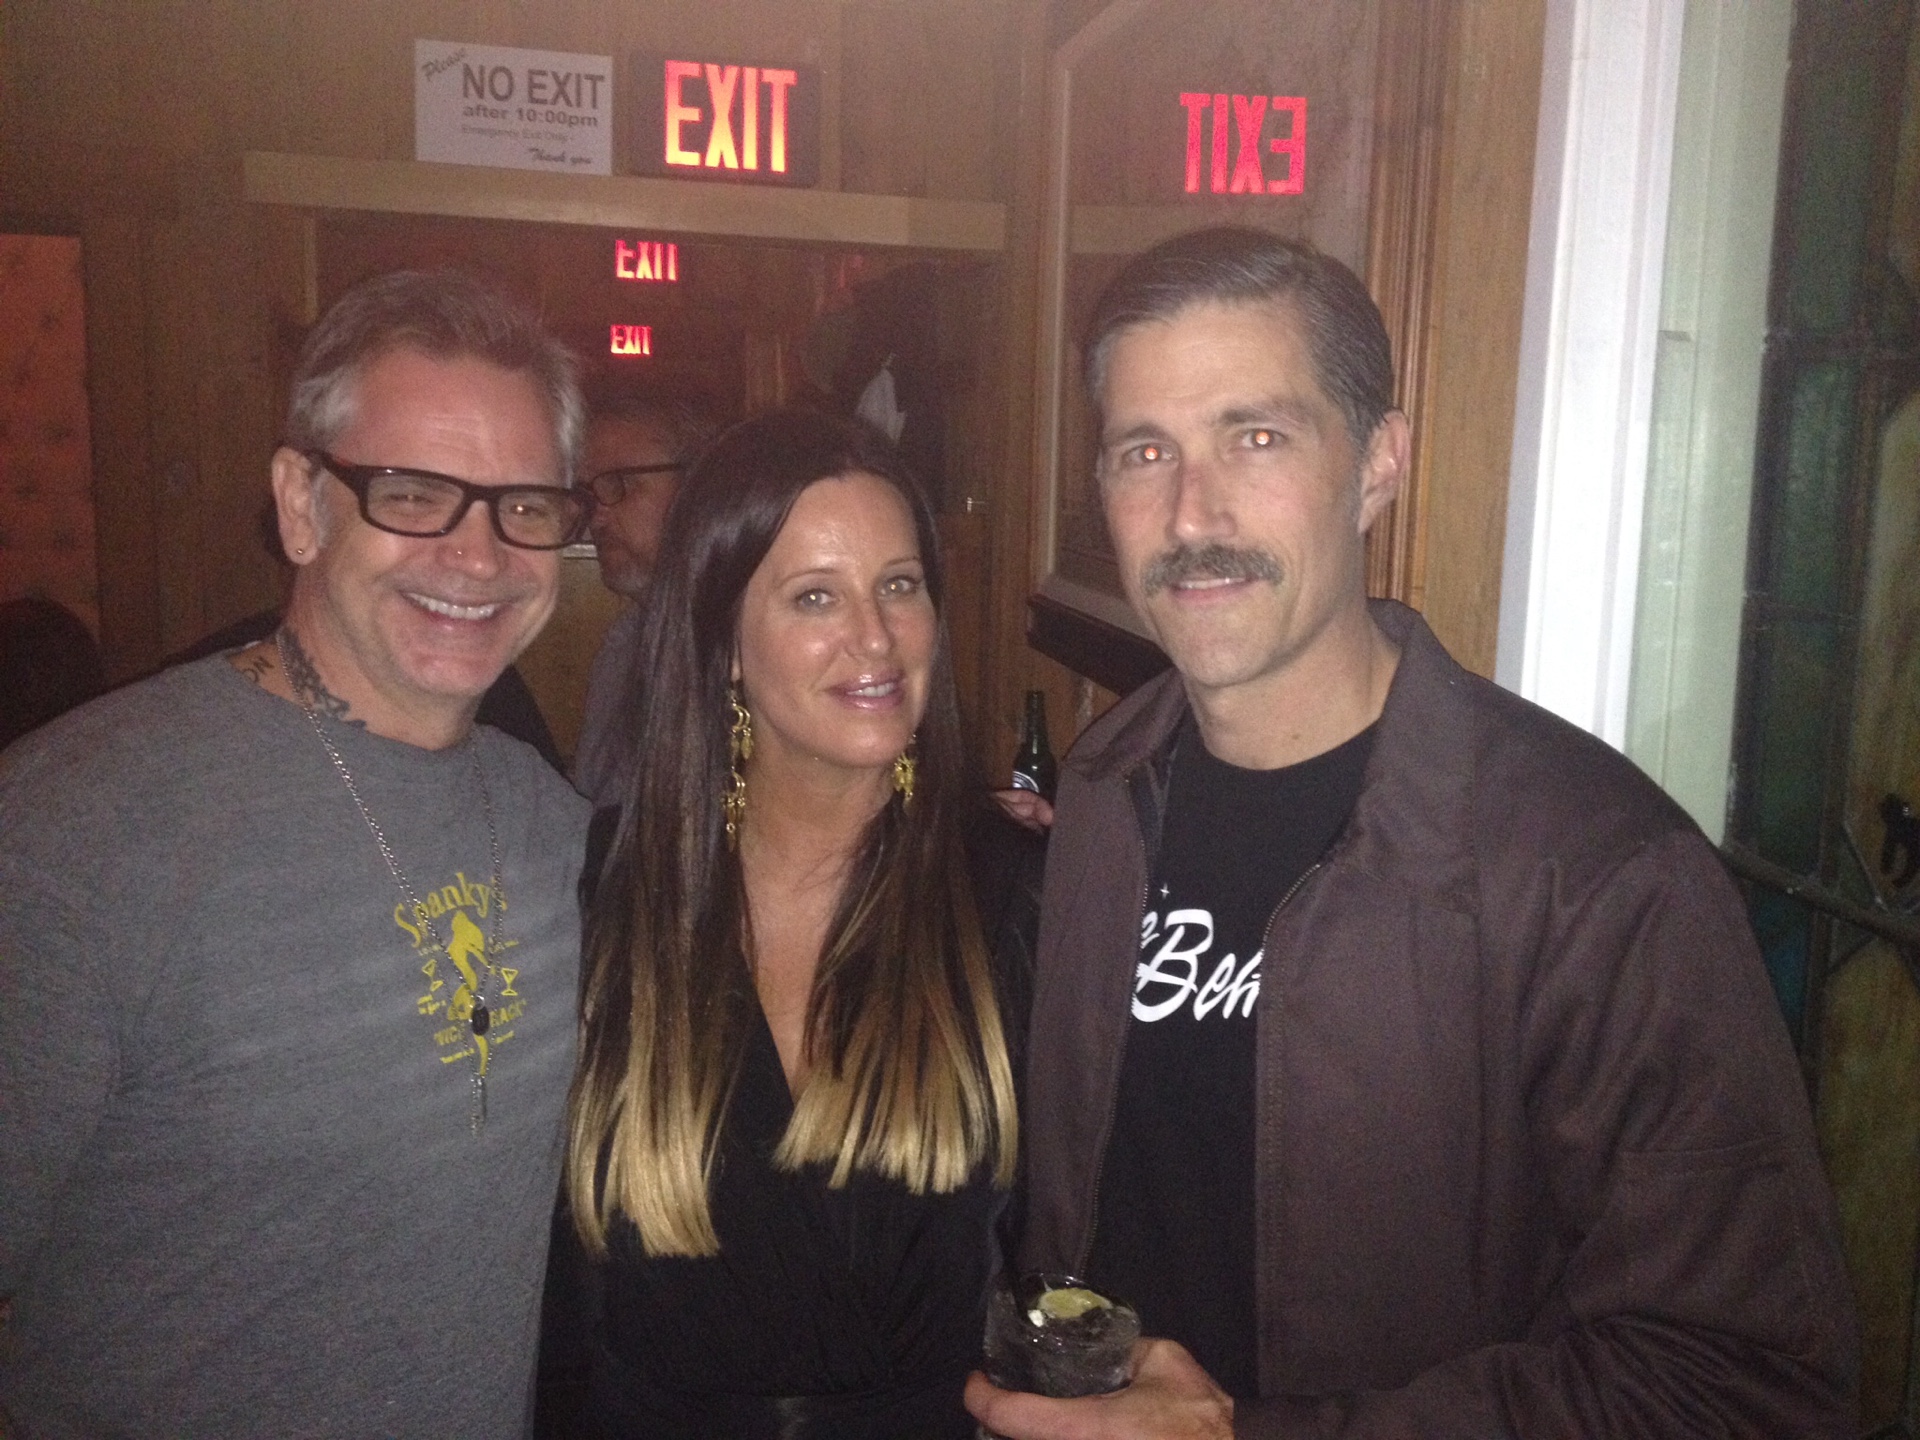 Hanging out with Patty Stanger and Matthew Fox